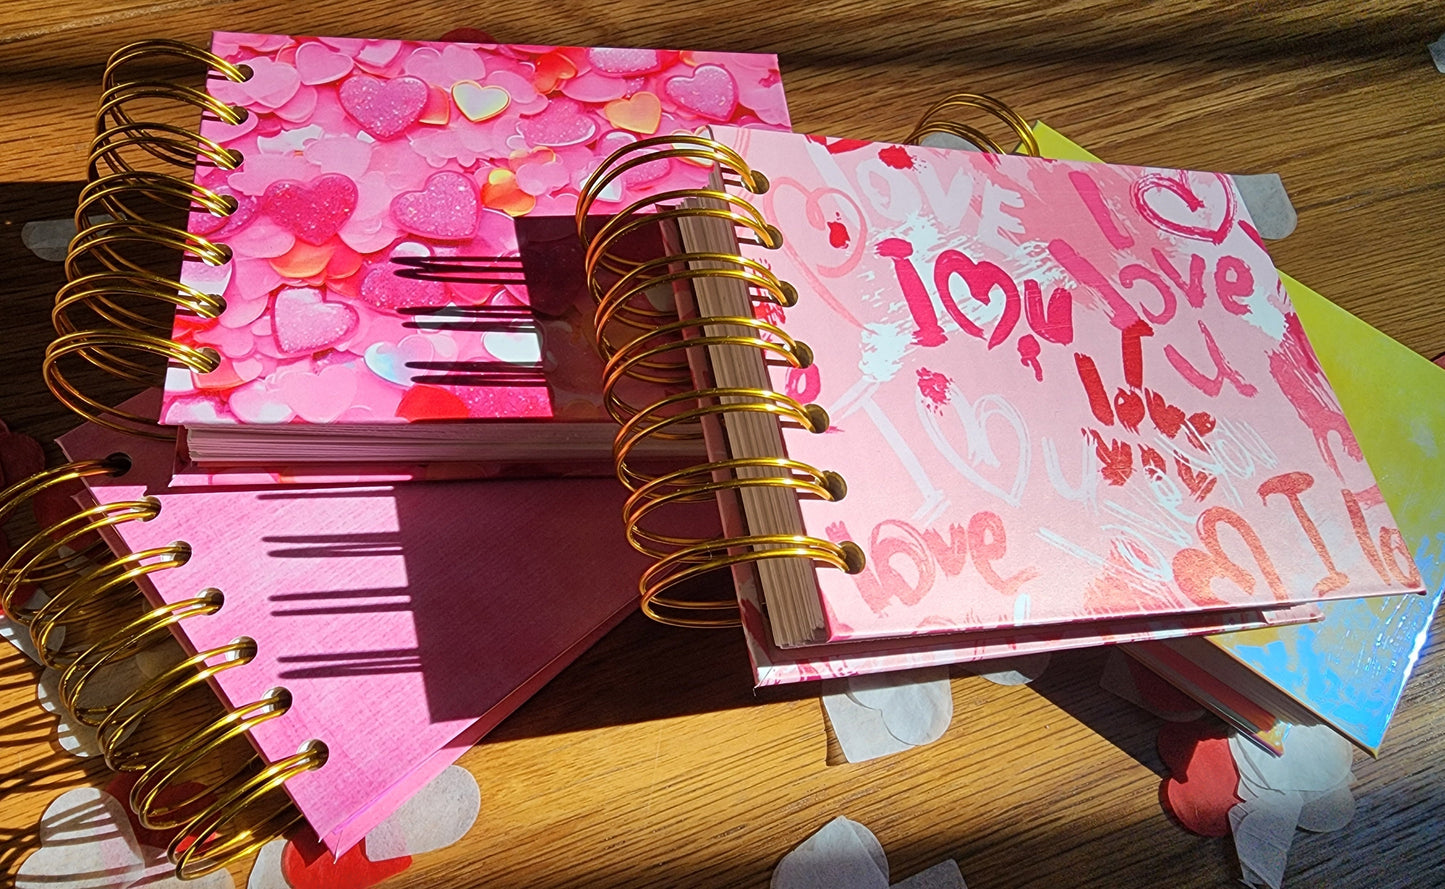 Other adorable doodle pads that are available for your Valentine.